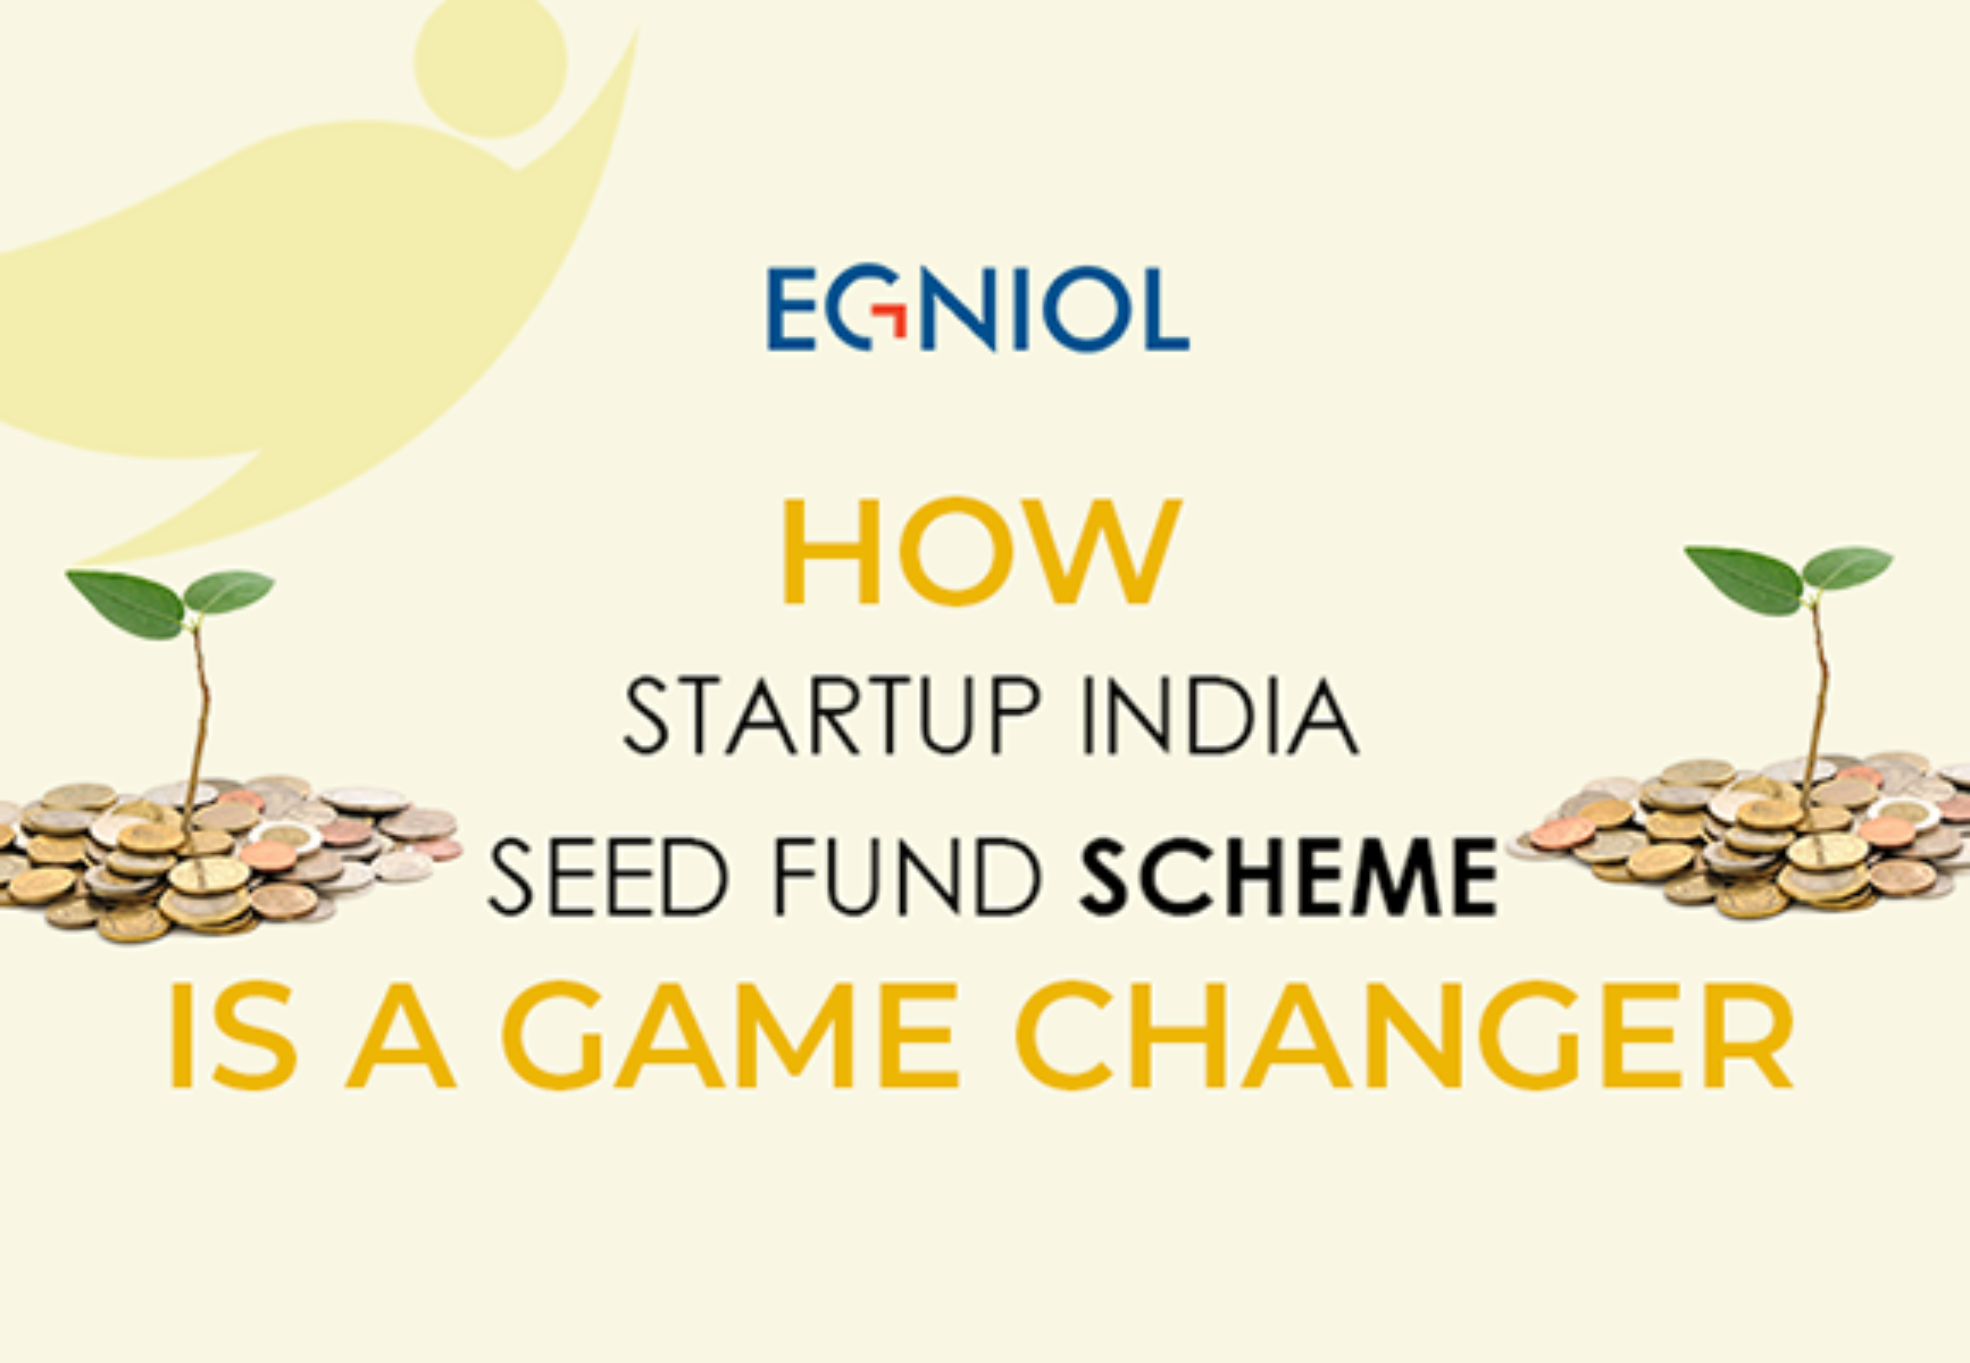 How Start-up India Seed Fund Scheme is a Game Changer - By Egniol